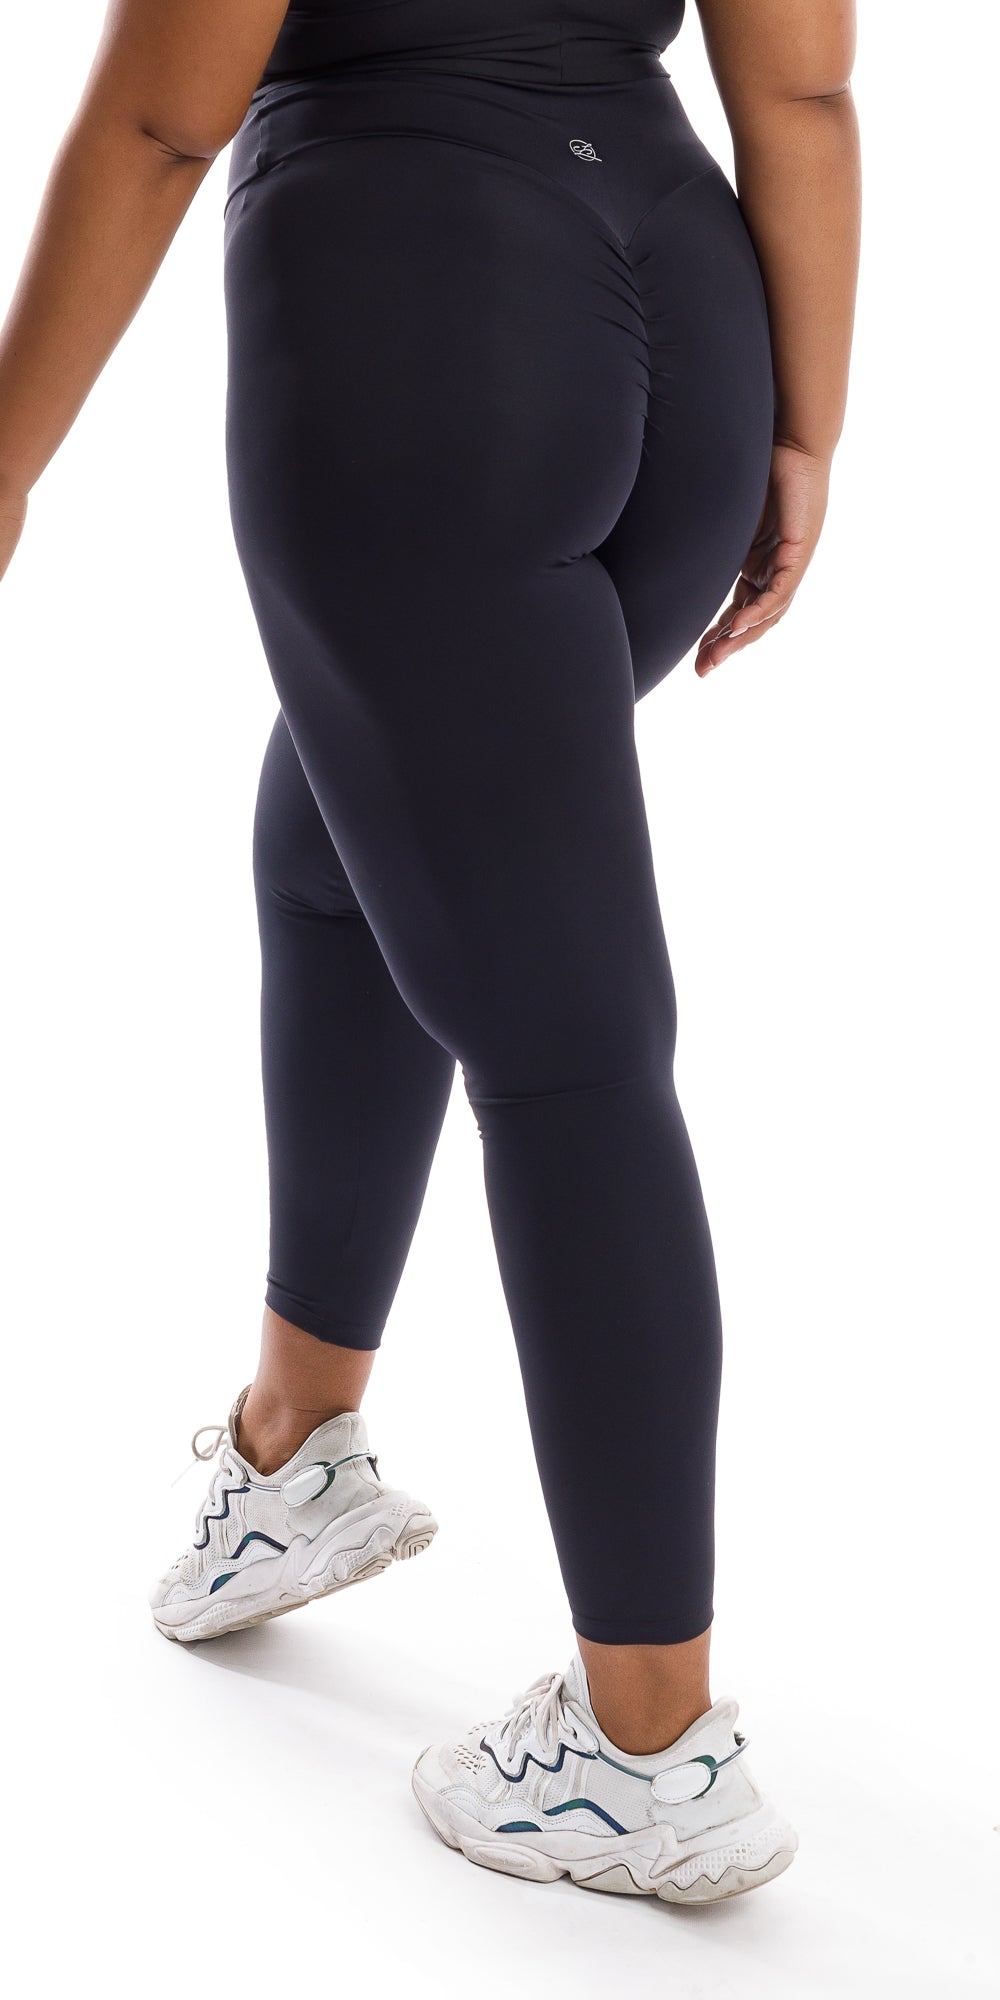 Angled side to rear view of girl in black Midnight Body Luxe Scrunch Bum Leggings lifting one heel